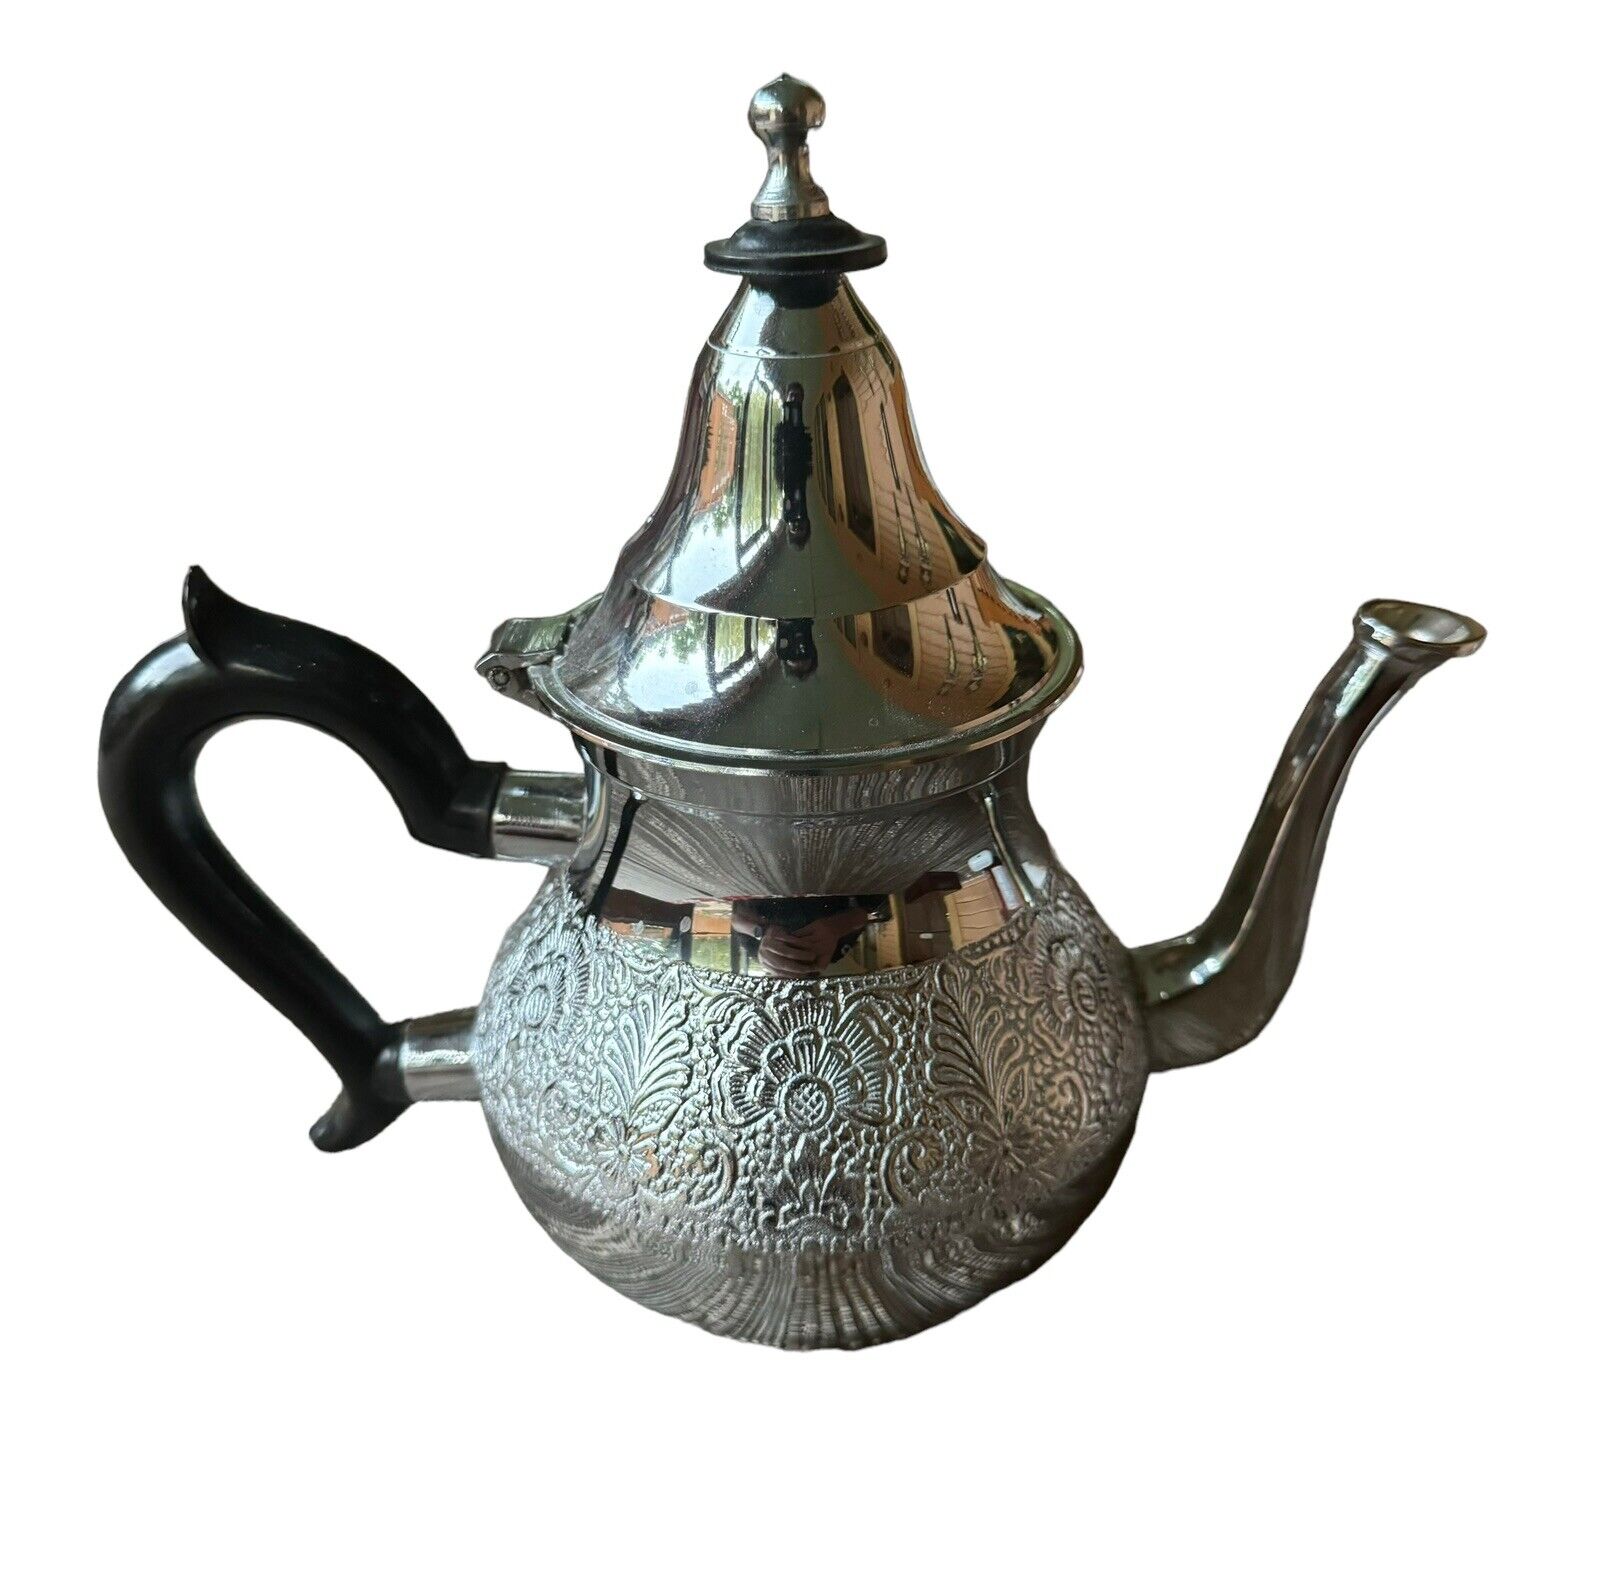 70 % Copper & 30 % Zink Teapot - Orient International Trading Ltd Made In India